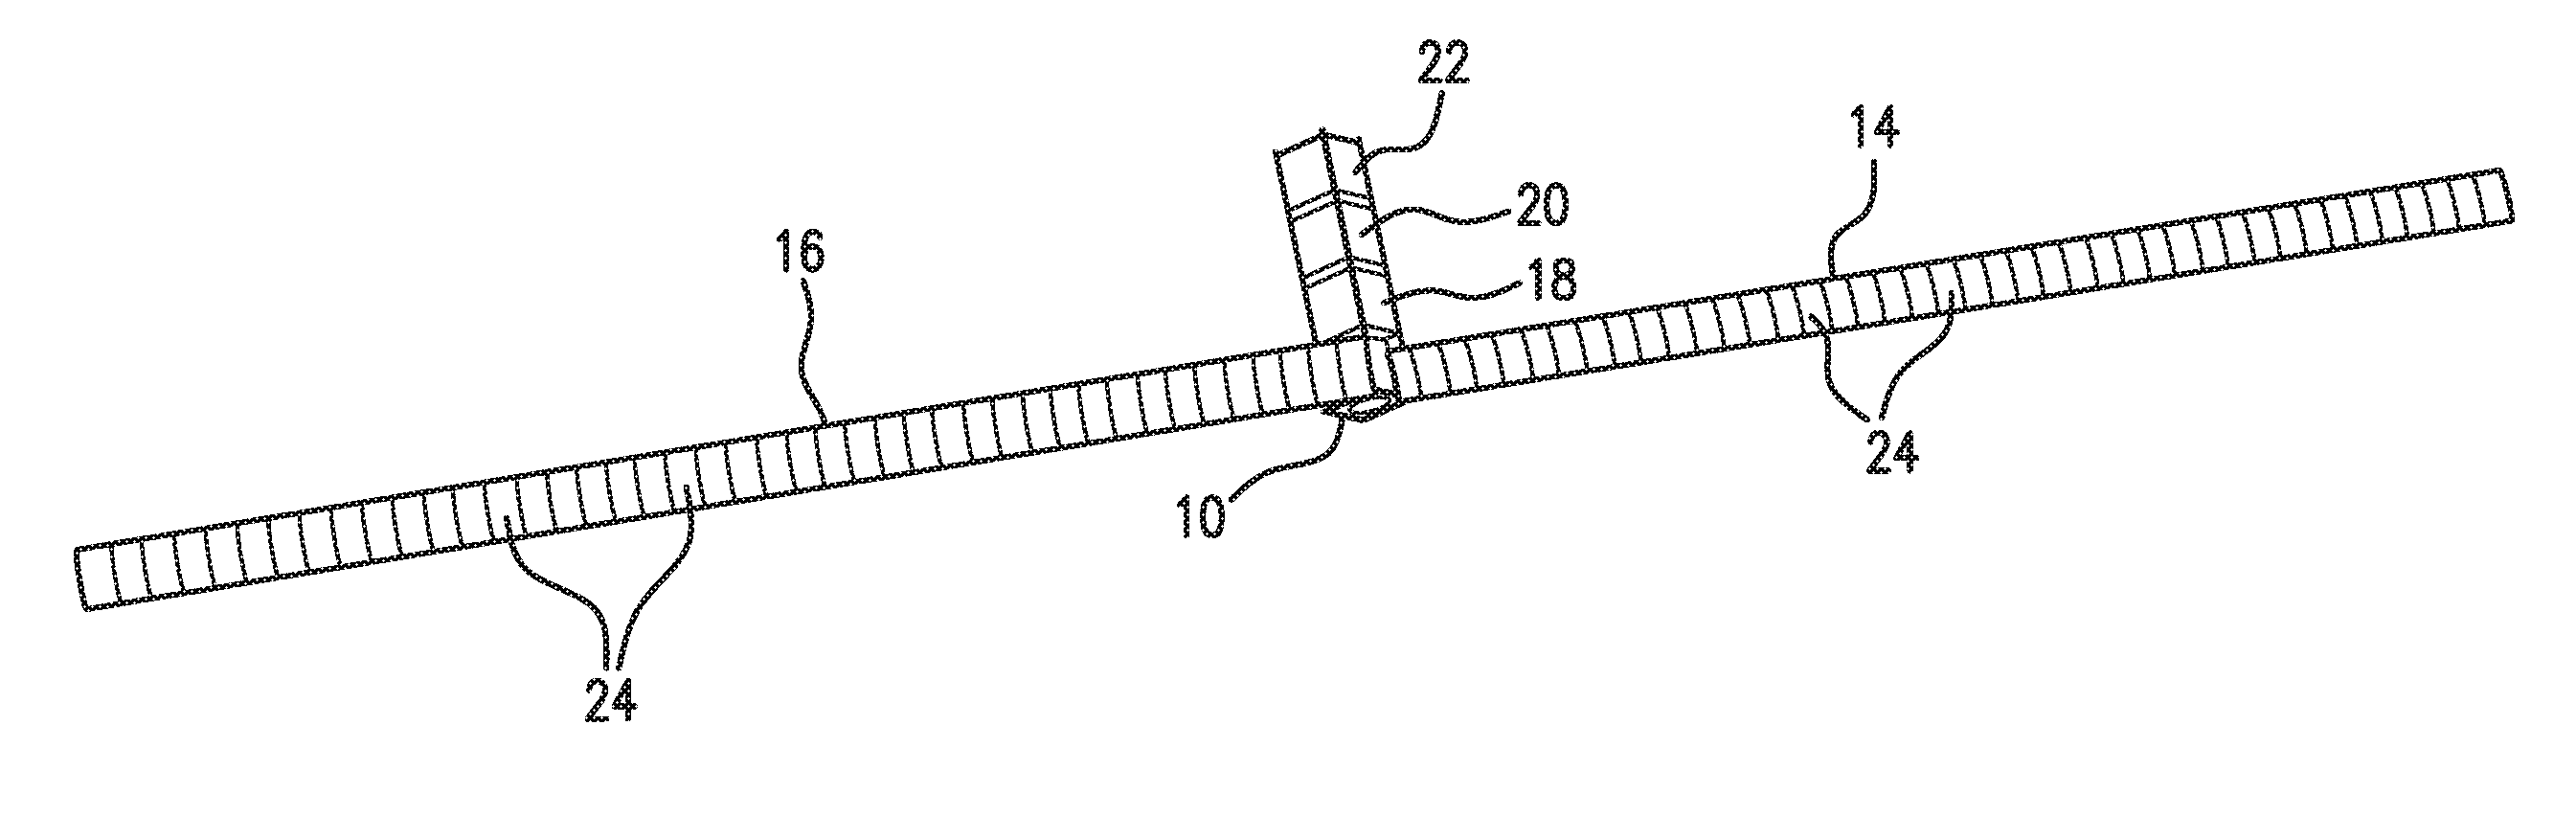 Method for releasing a deployable boom